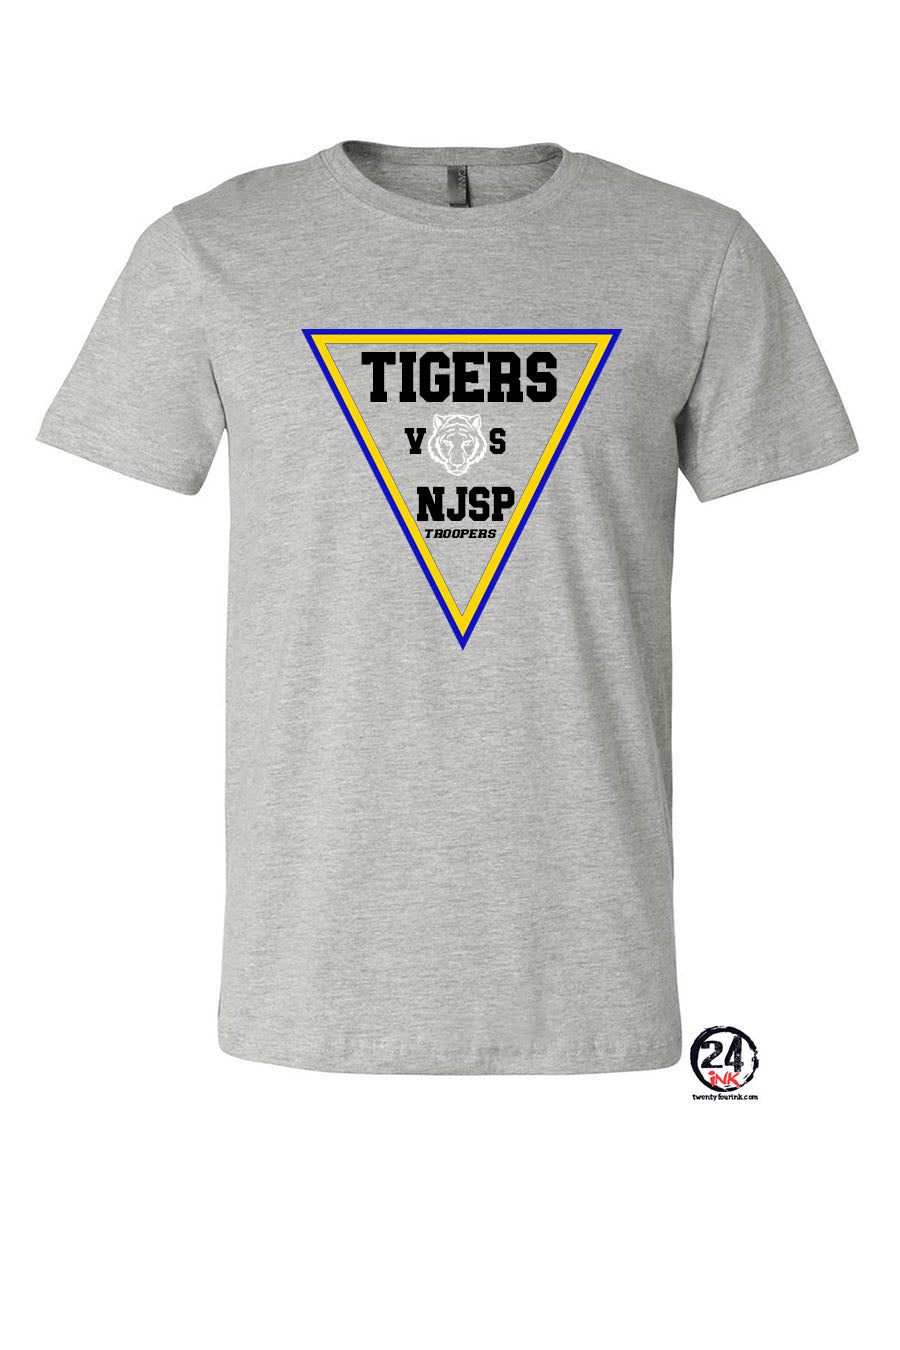 Tigers VS Troopers T-Shirt